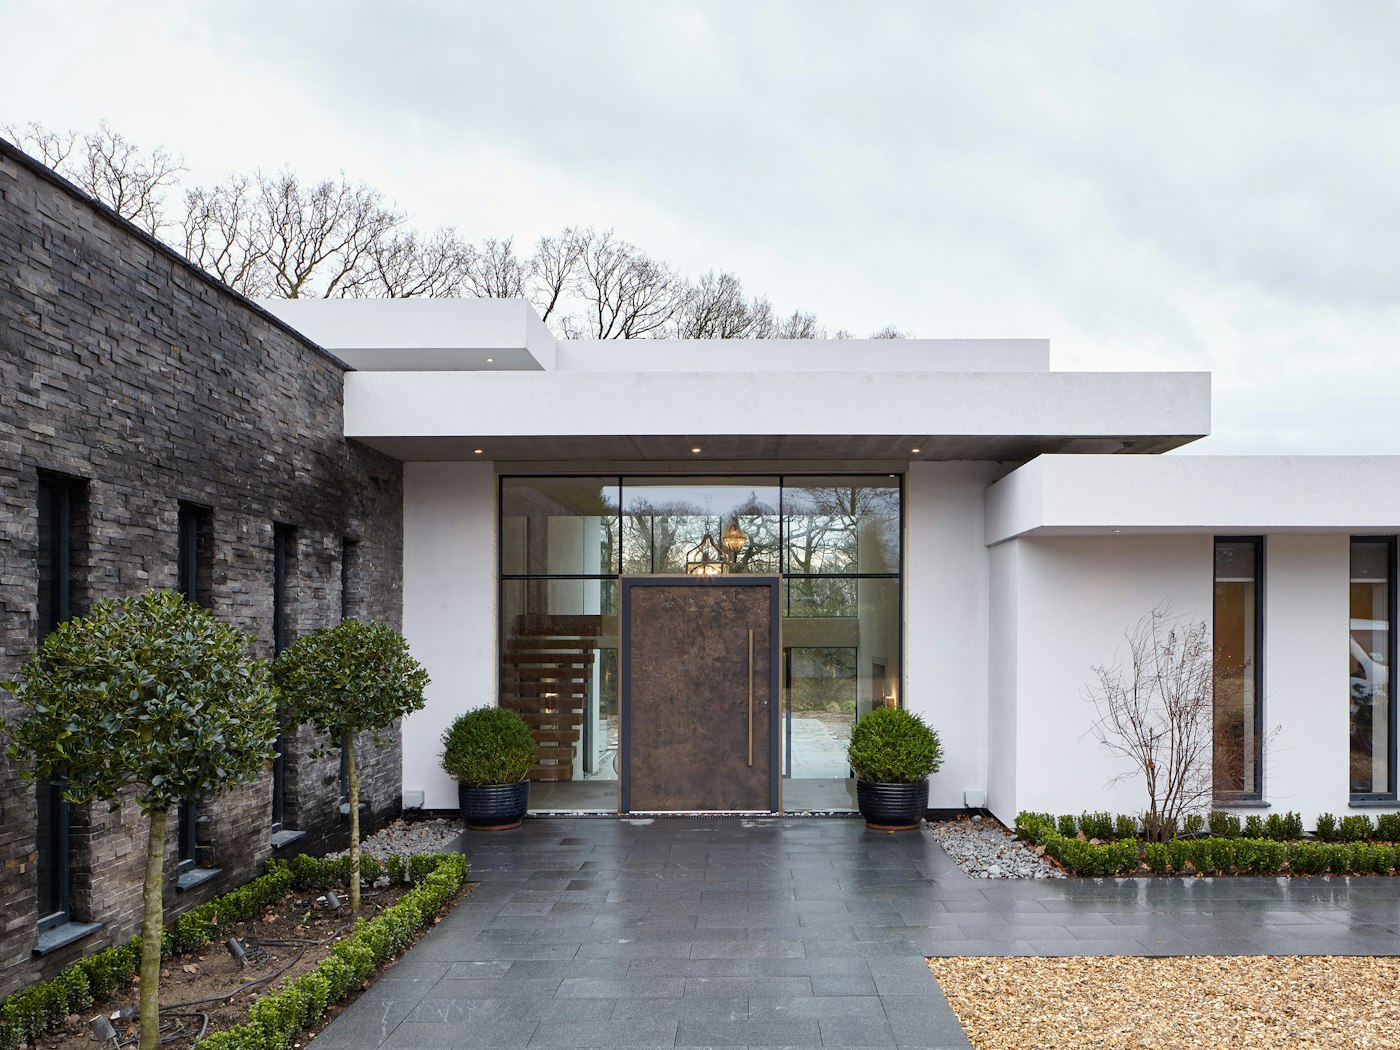 This luxury bronze door brings together the mix of white render, glass walling and grey stonework